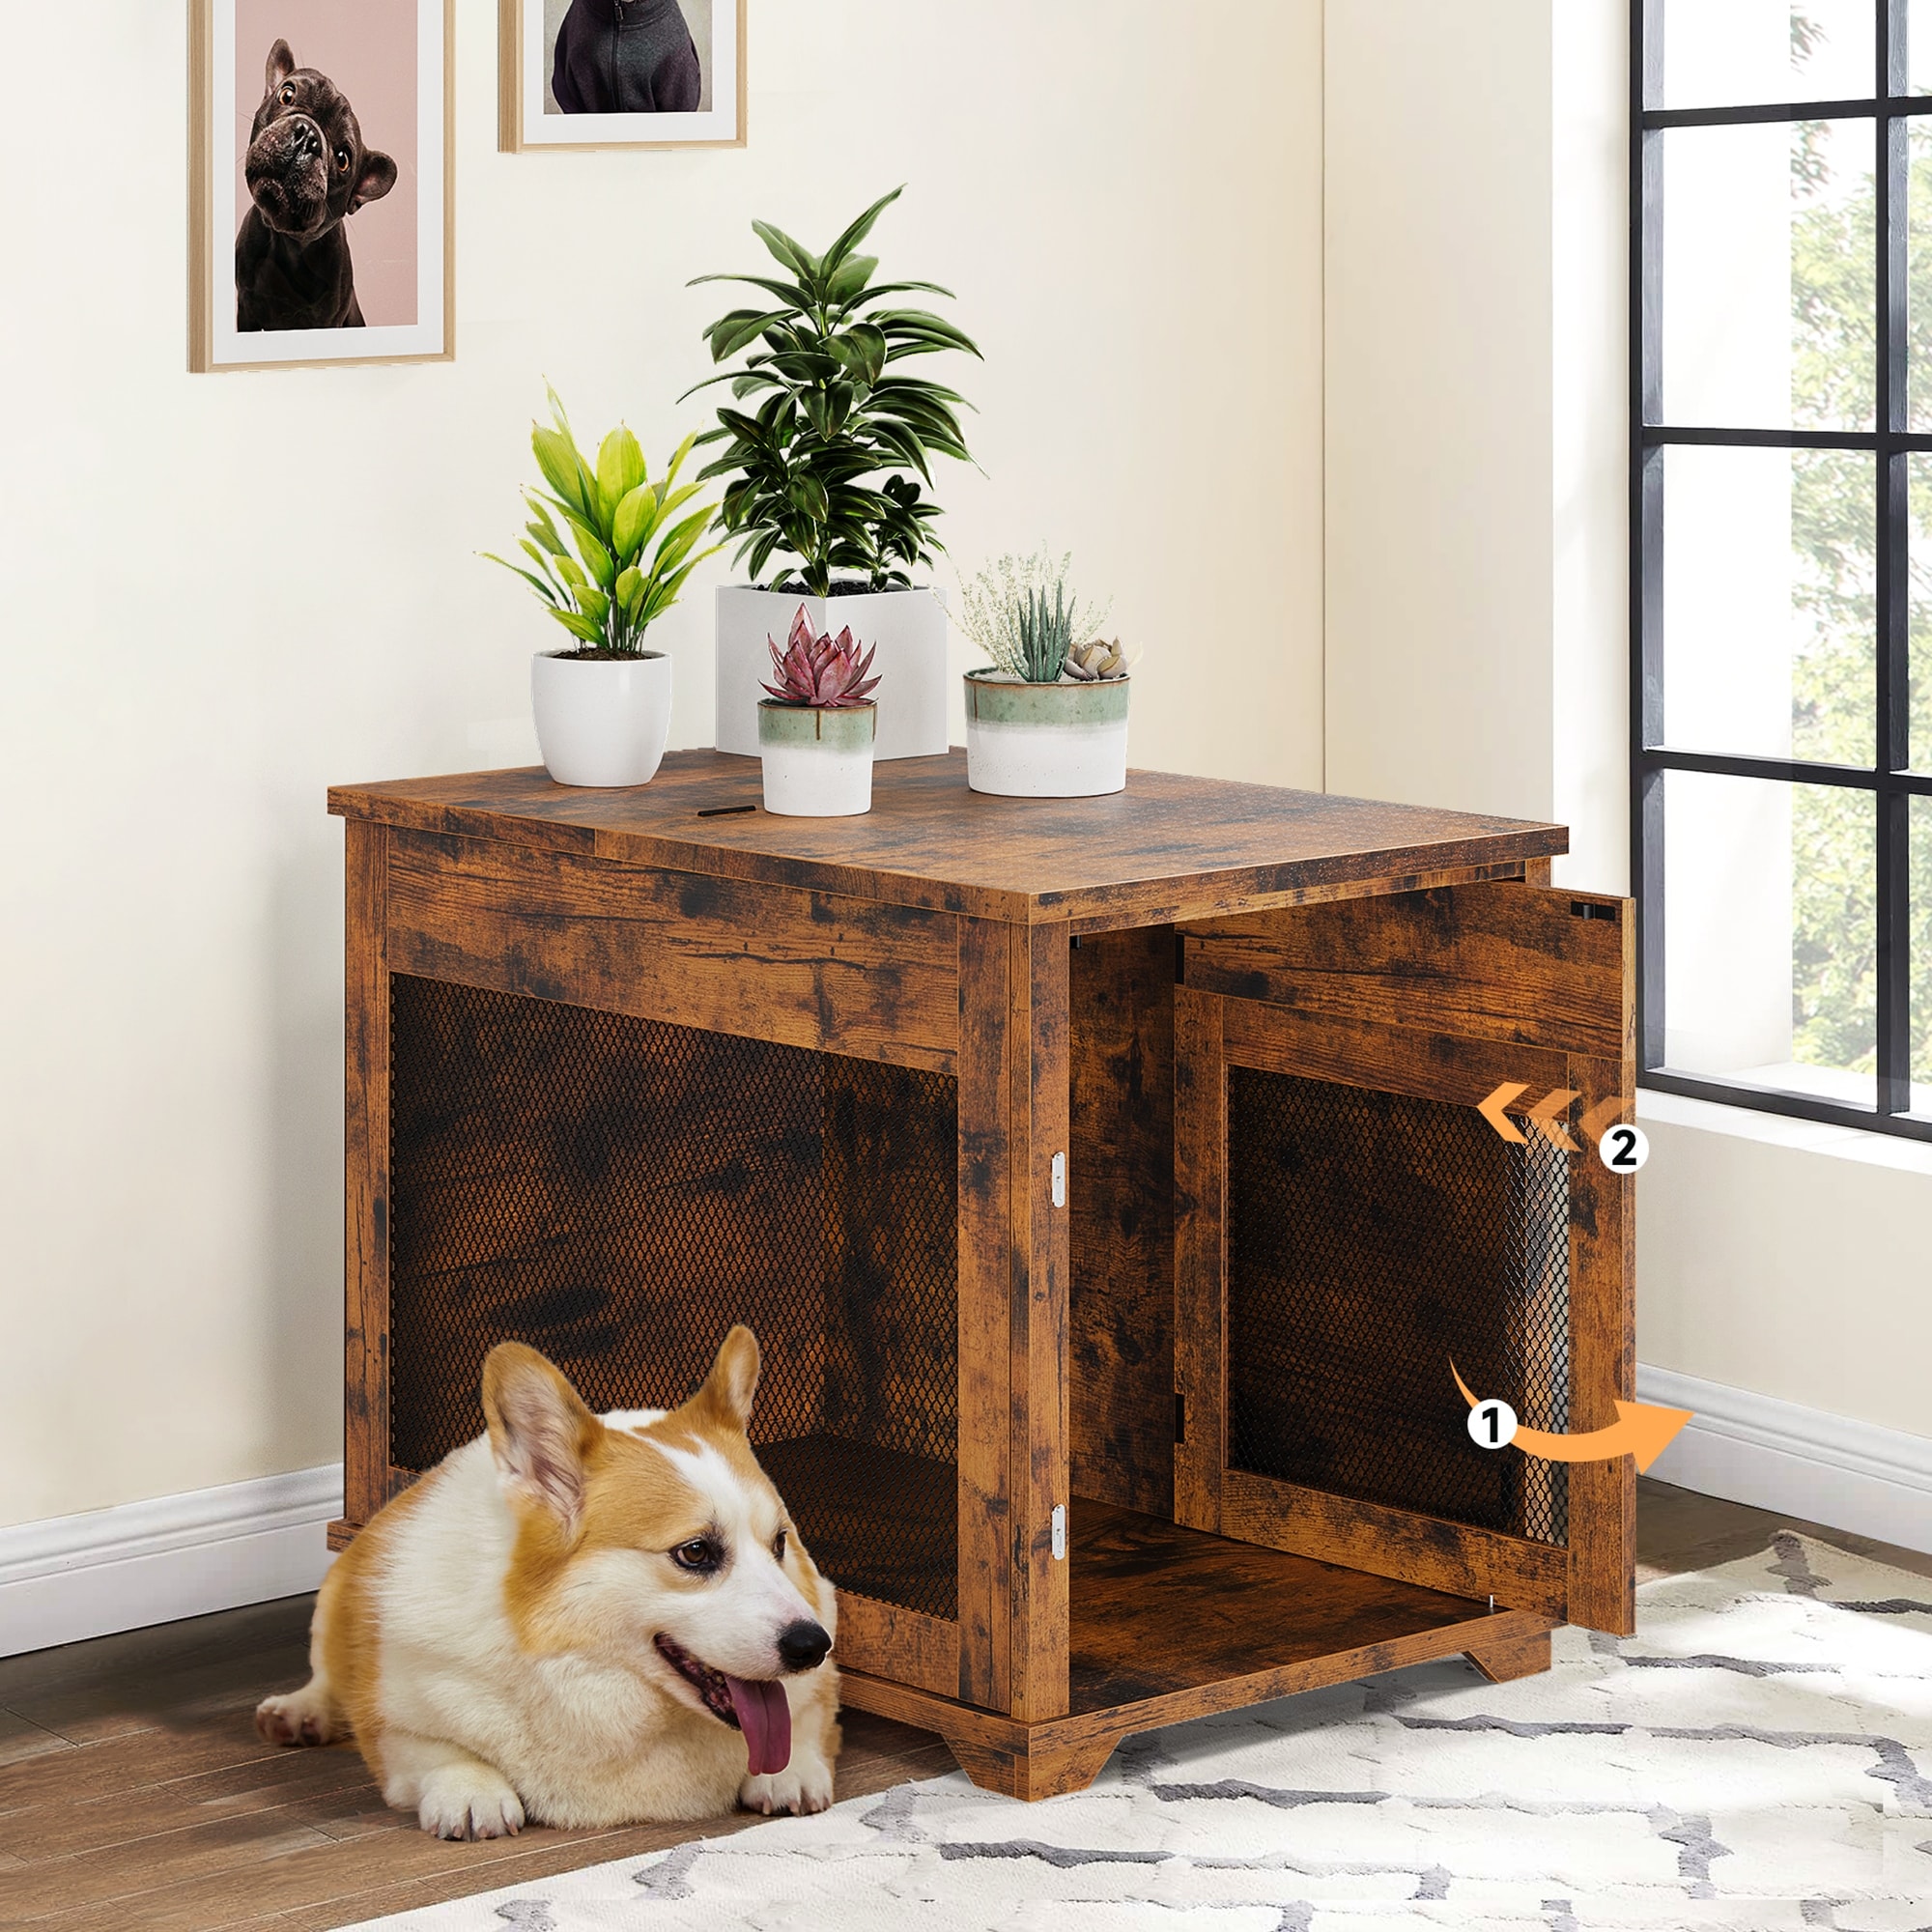 https://ak1.ostkcdn.com/images/products/is/images/direct/224f0127c88561639835eee8d0308fe3c8be9475/Farmhouse-End-Table-Wooden-Pet-Crate-Dog-Kennel-Furniture-With-Flip-Top.jpg